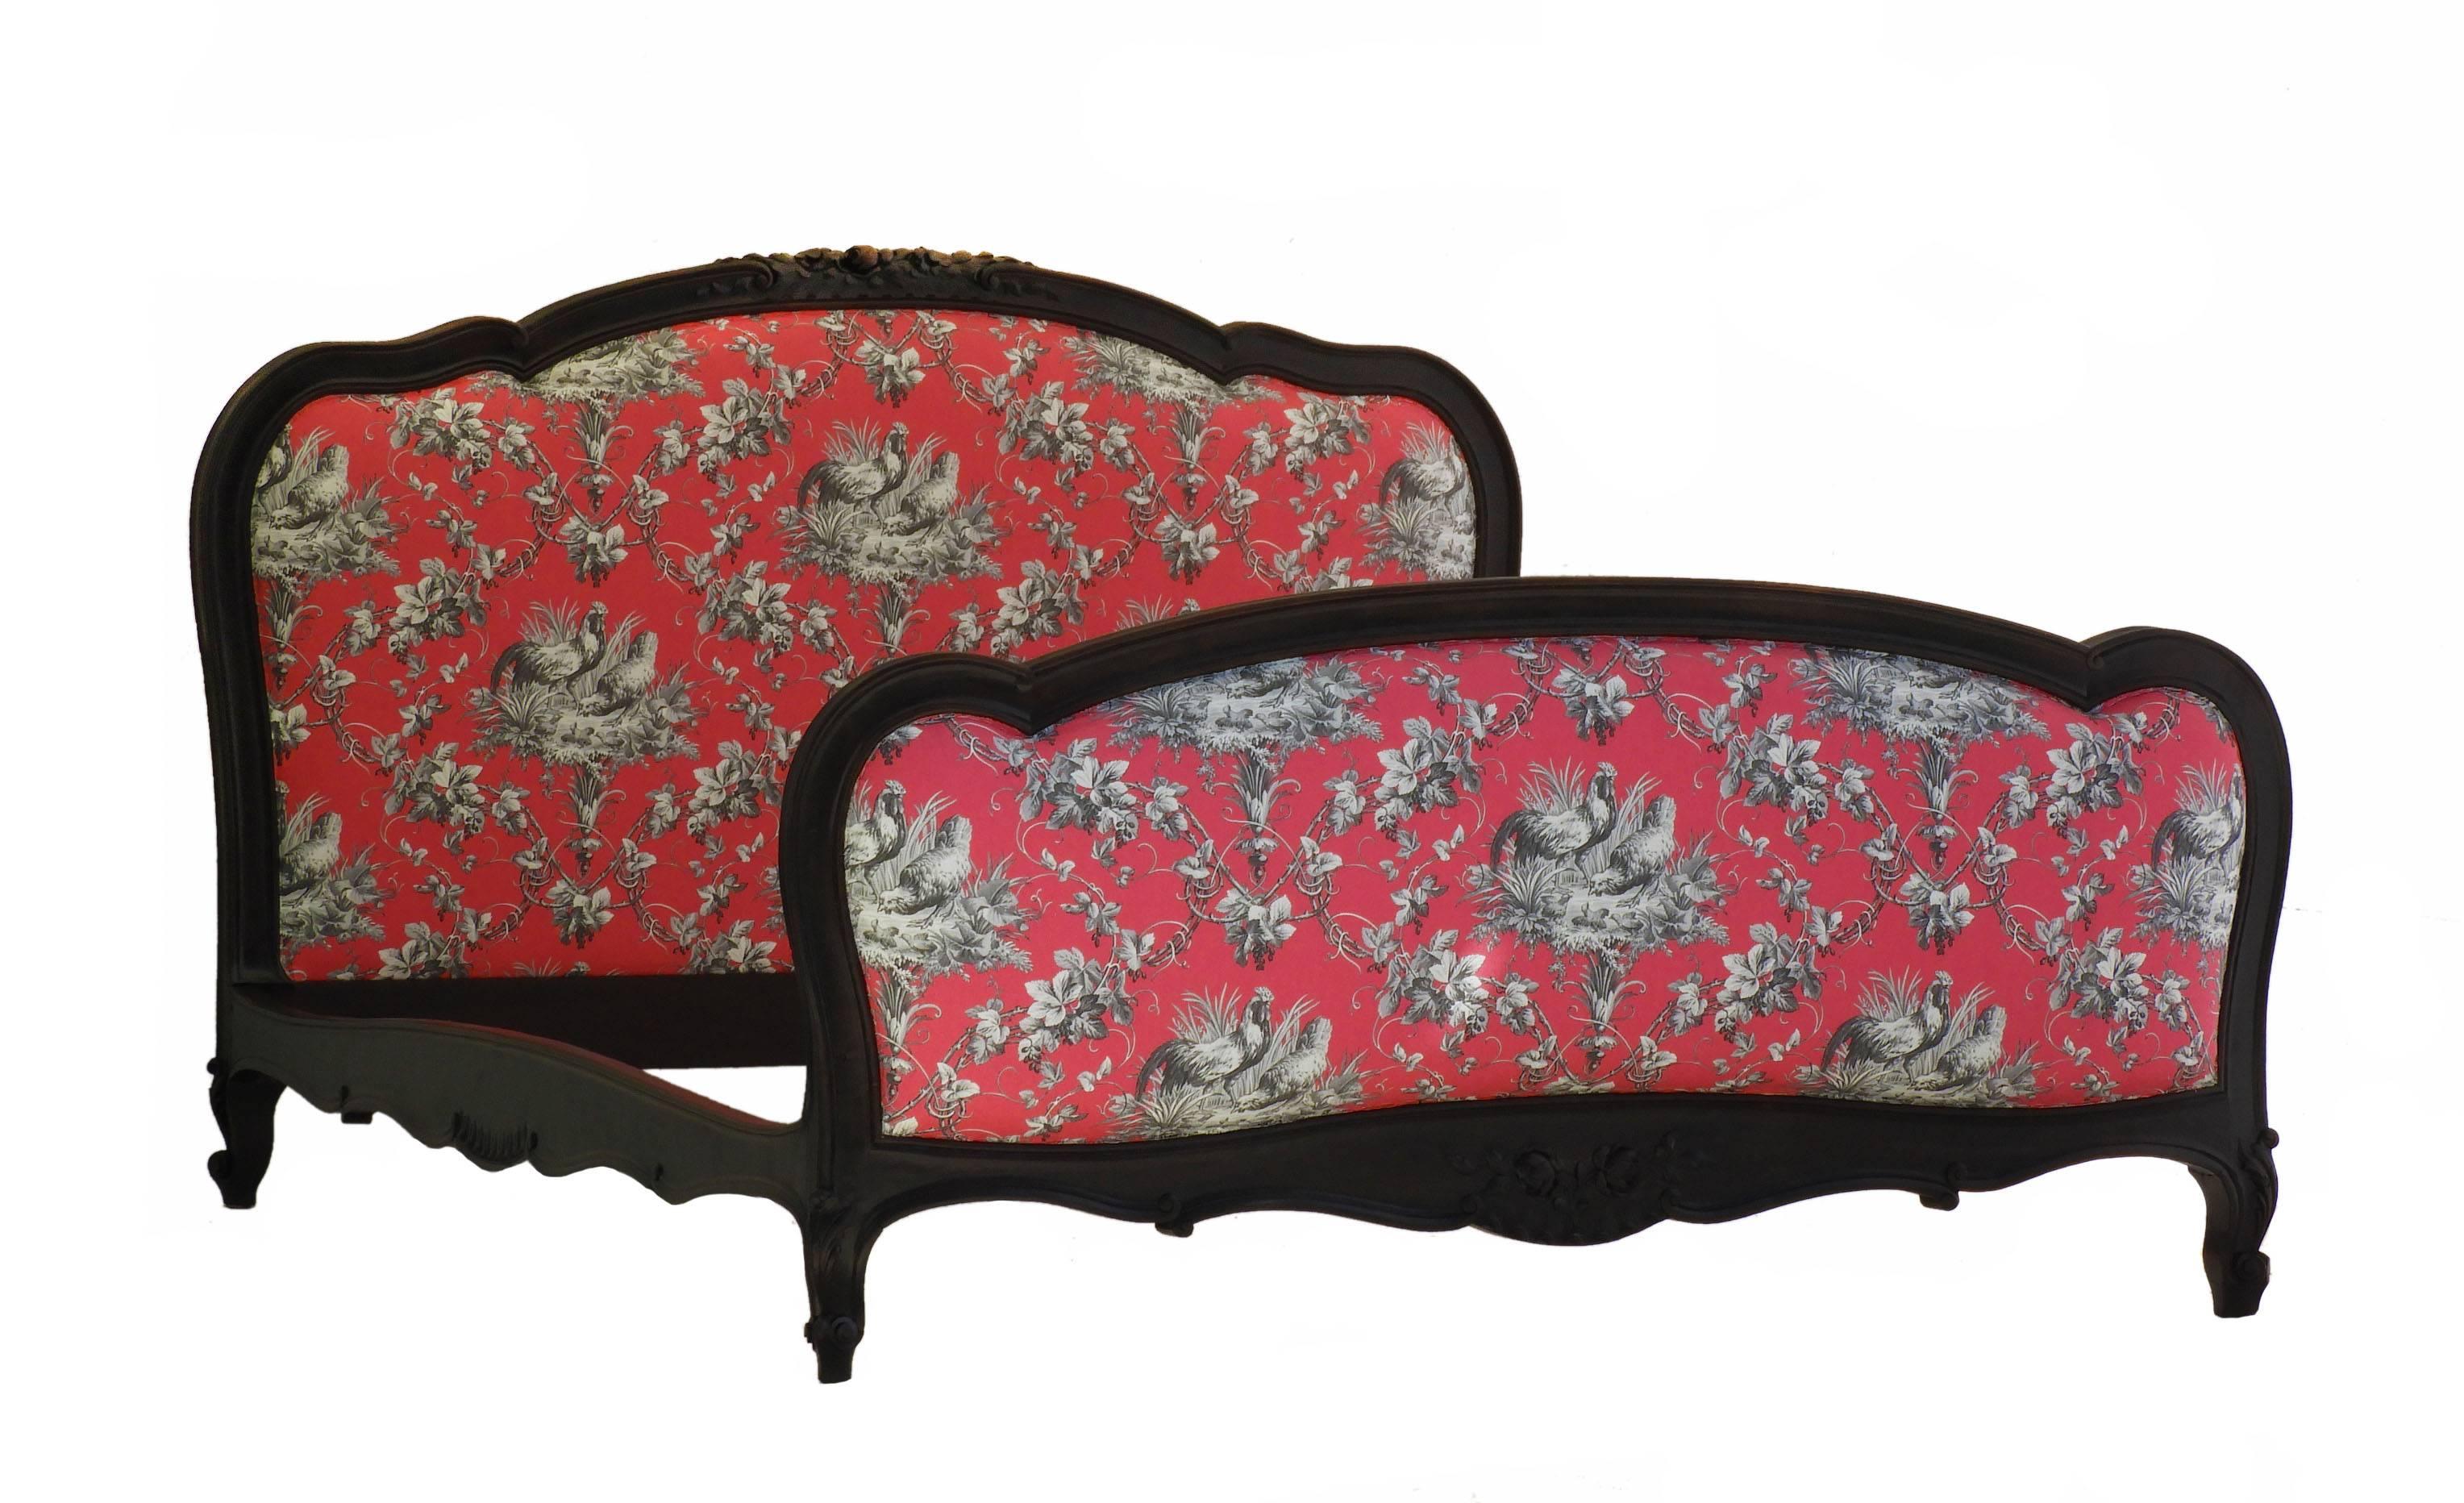 Upholstery Antique French Bed Upholstered Toile de Jouy US Queen UK King-Size, circa 1890